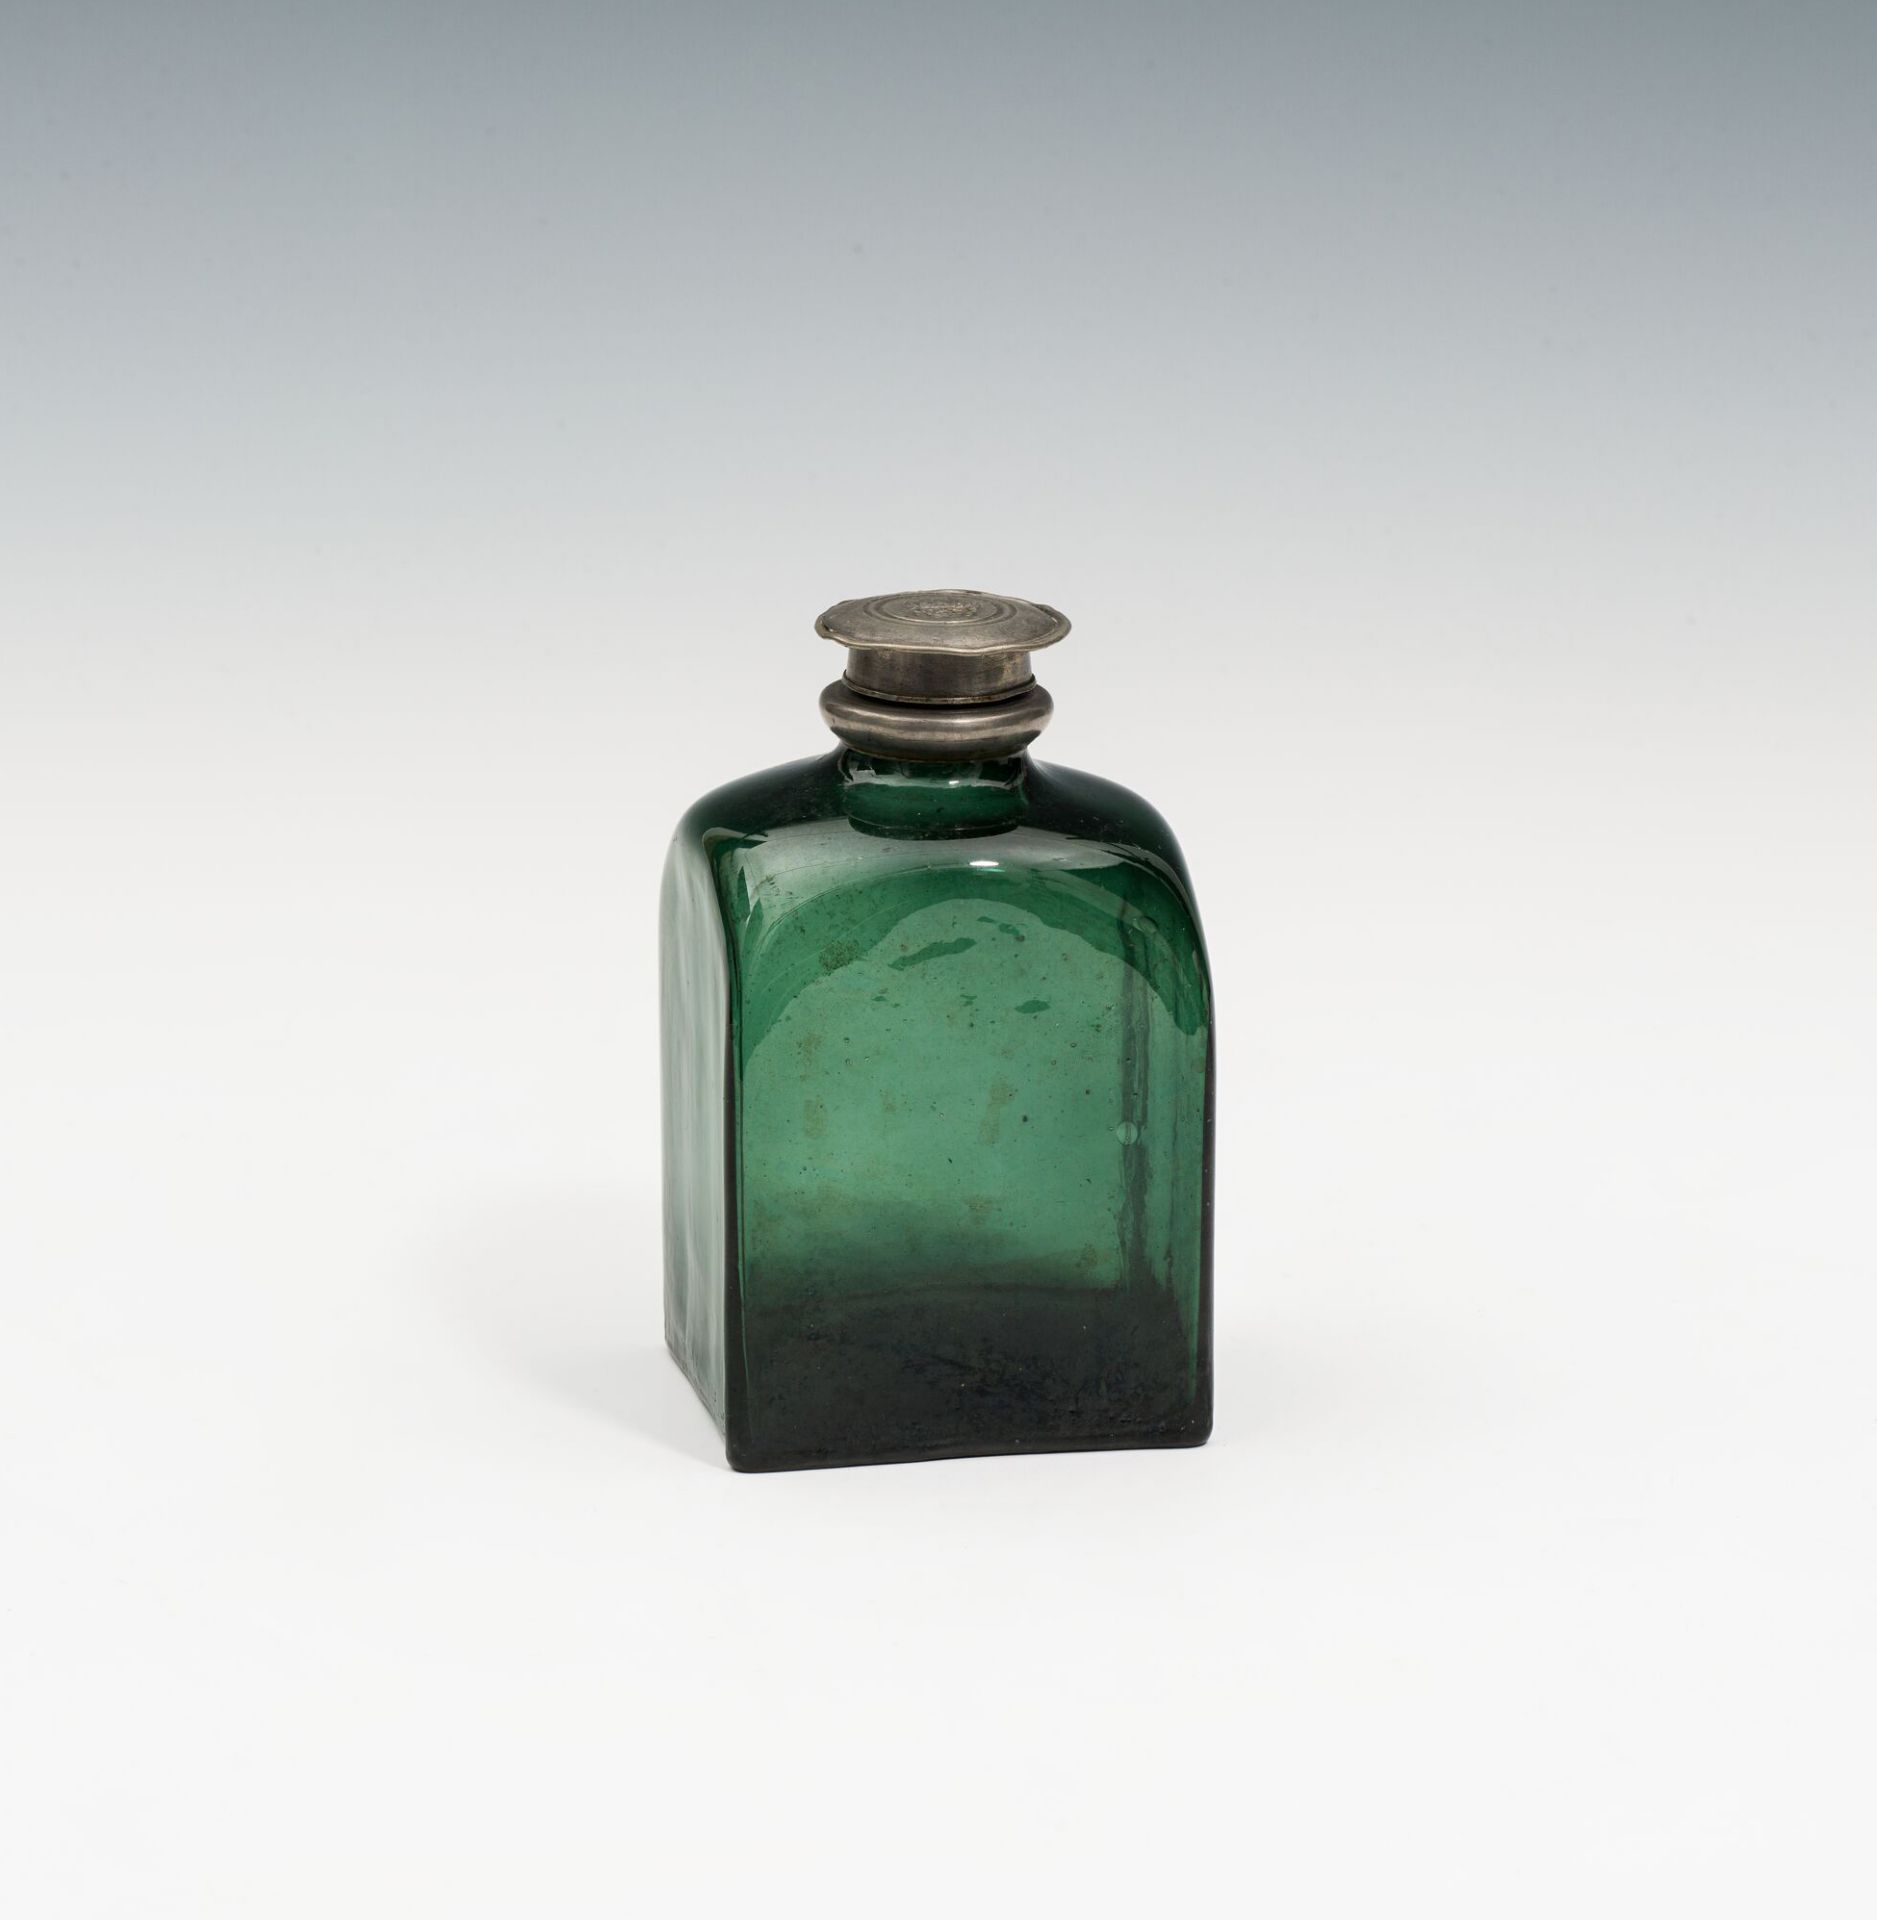 Bottle18th centurydark green glass; tearing scar at the bottom; pewter mounting with screw cap;